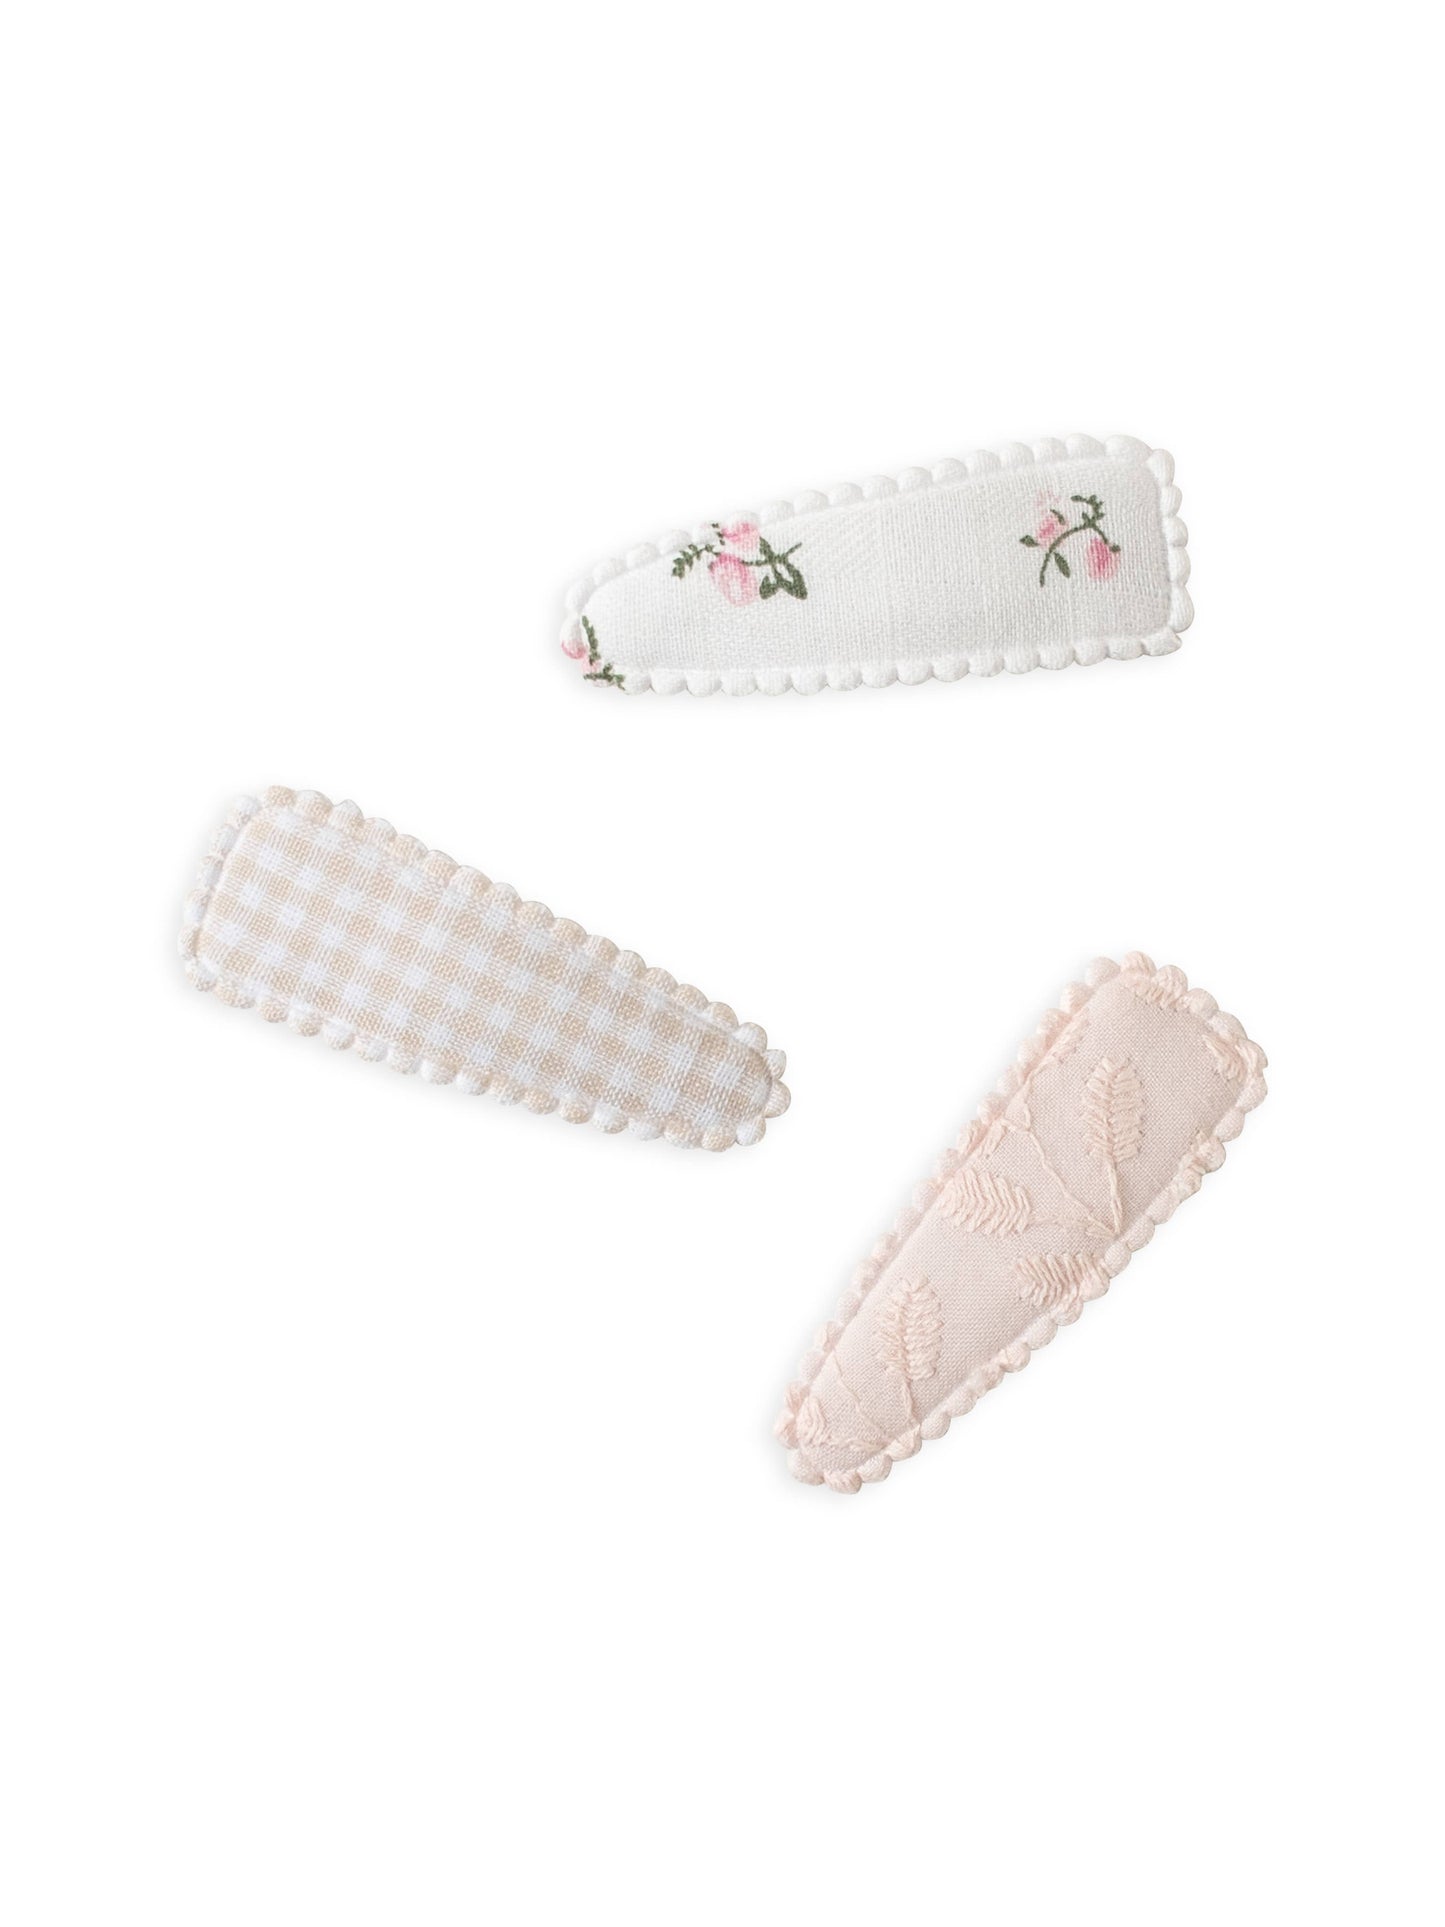 Colored Organics - Baby Hair Clips 3 Pack - Ivory Floral